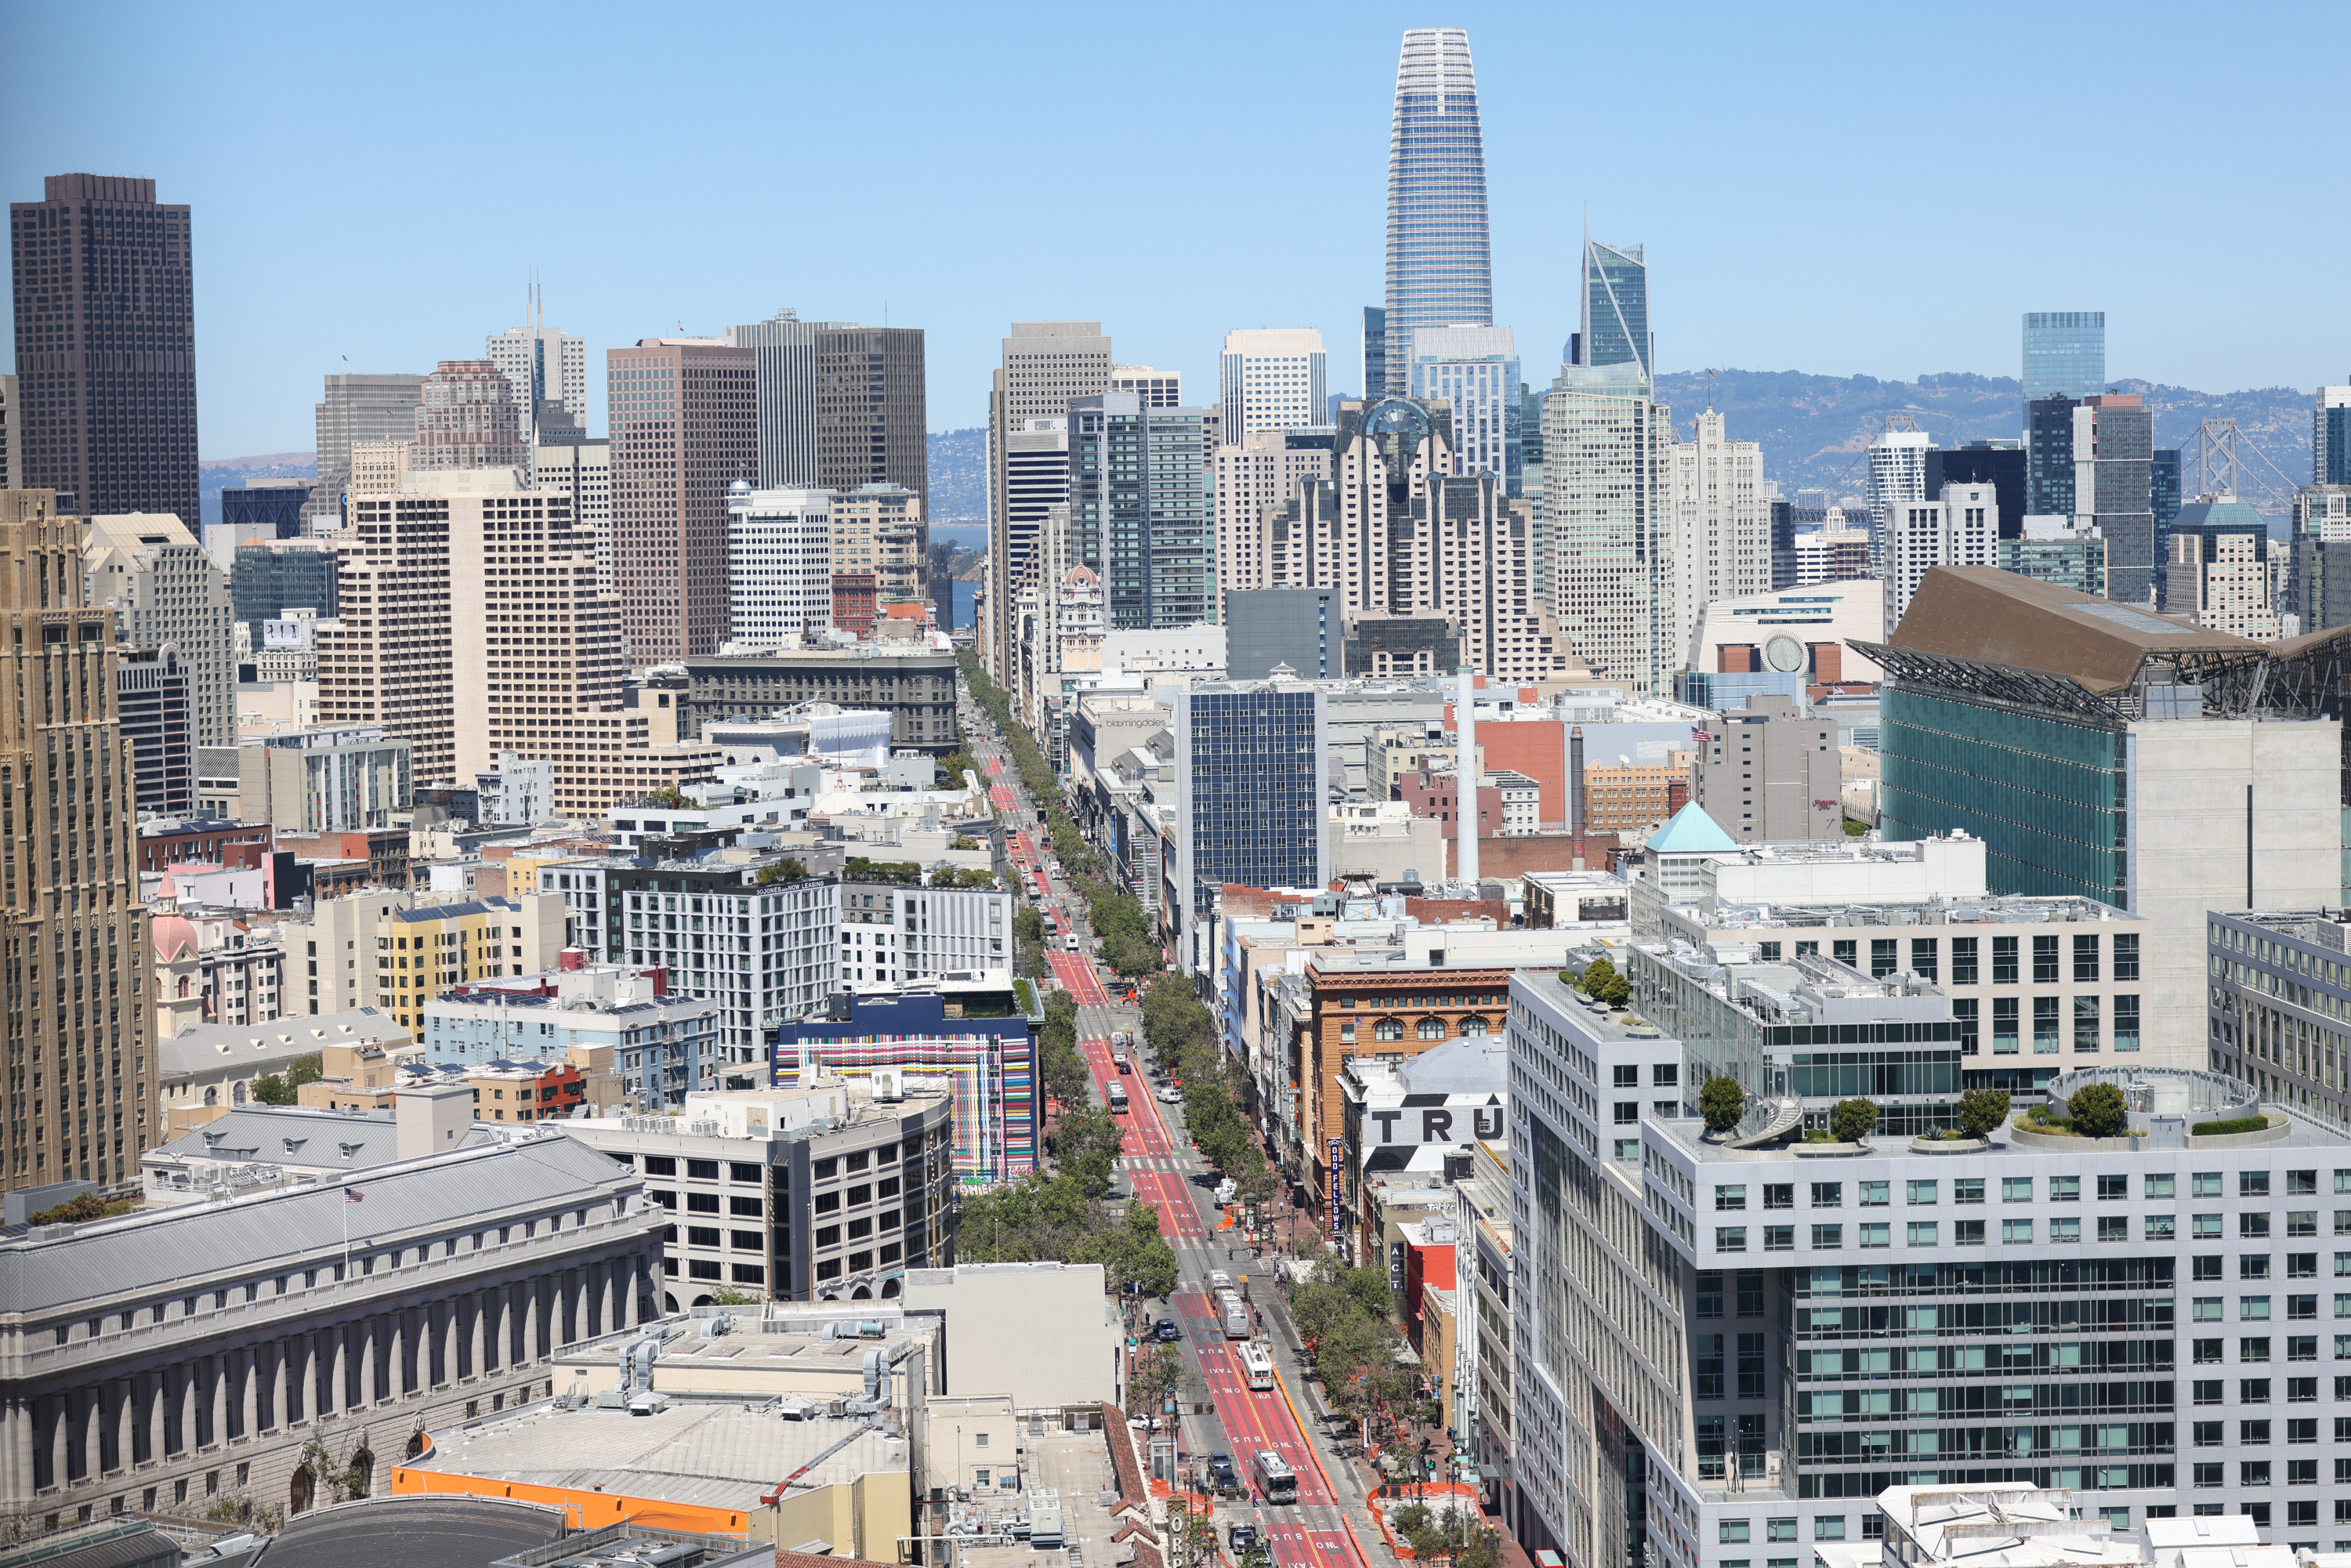 The skyline of downtown San Francisco.